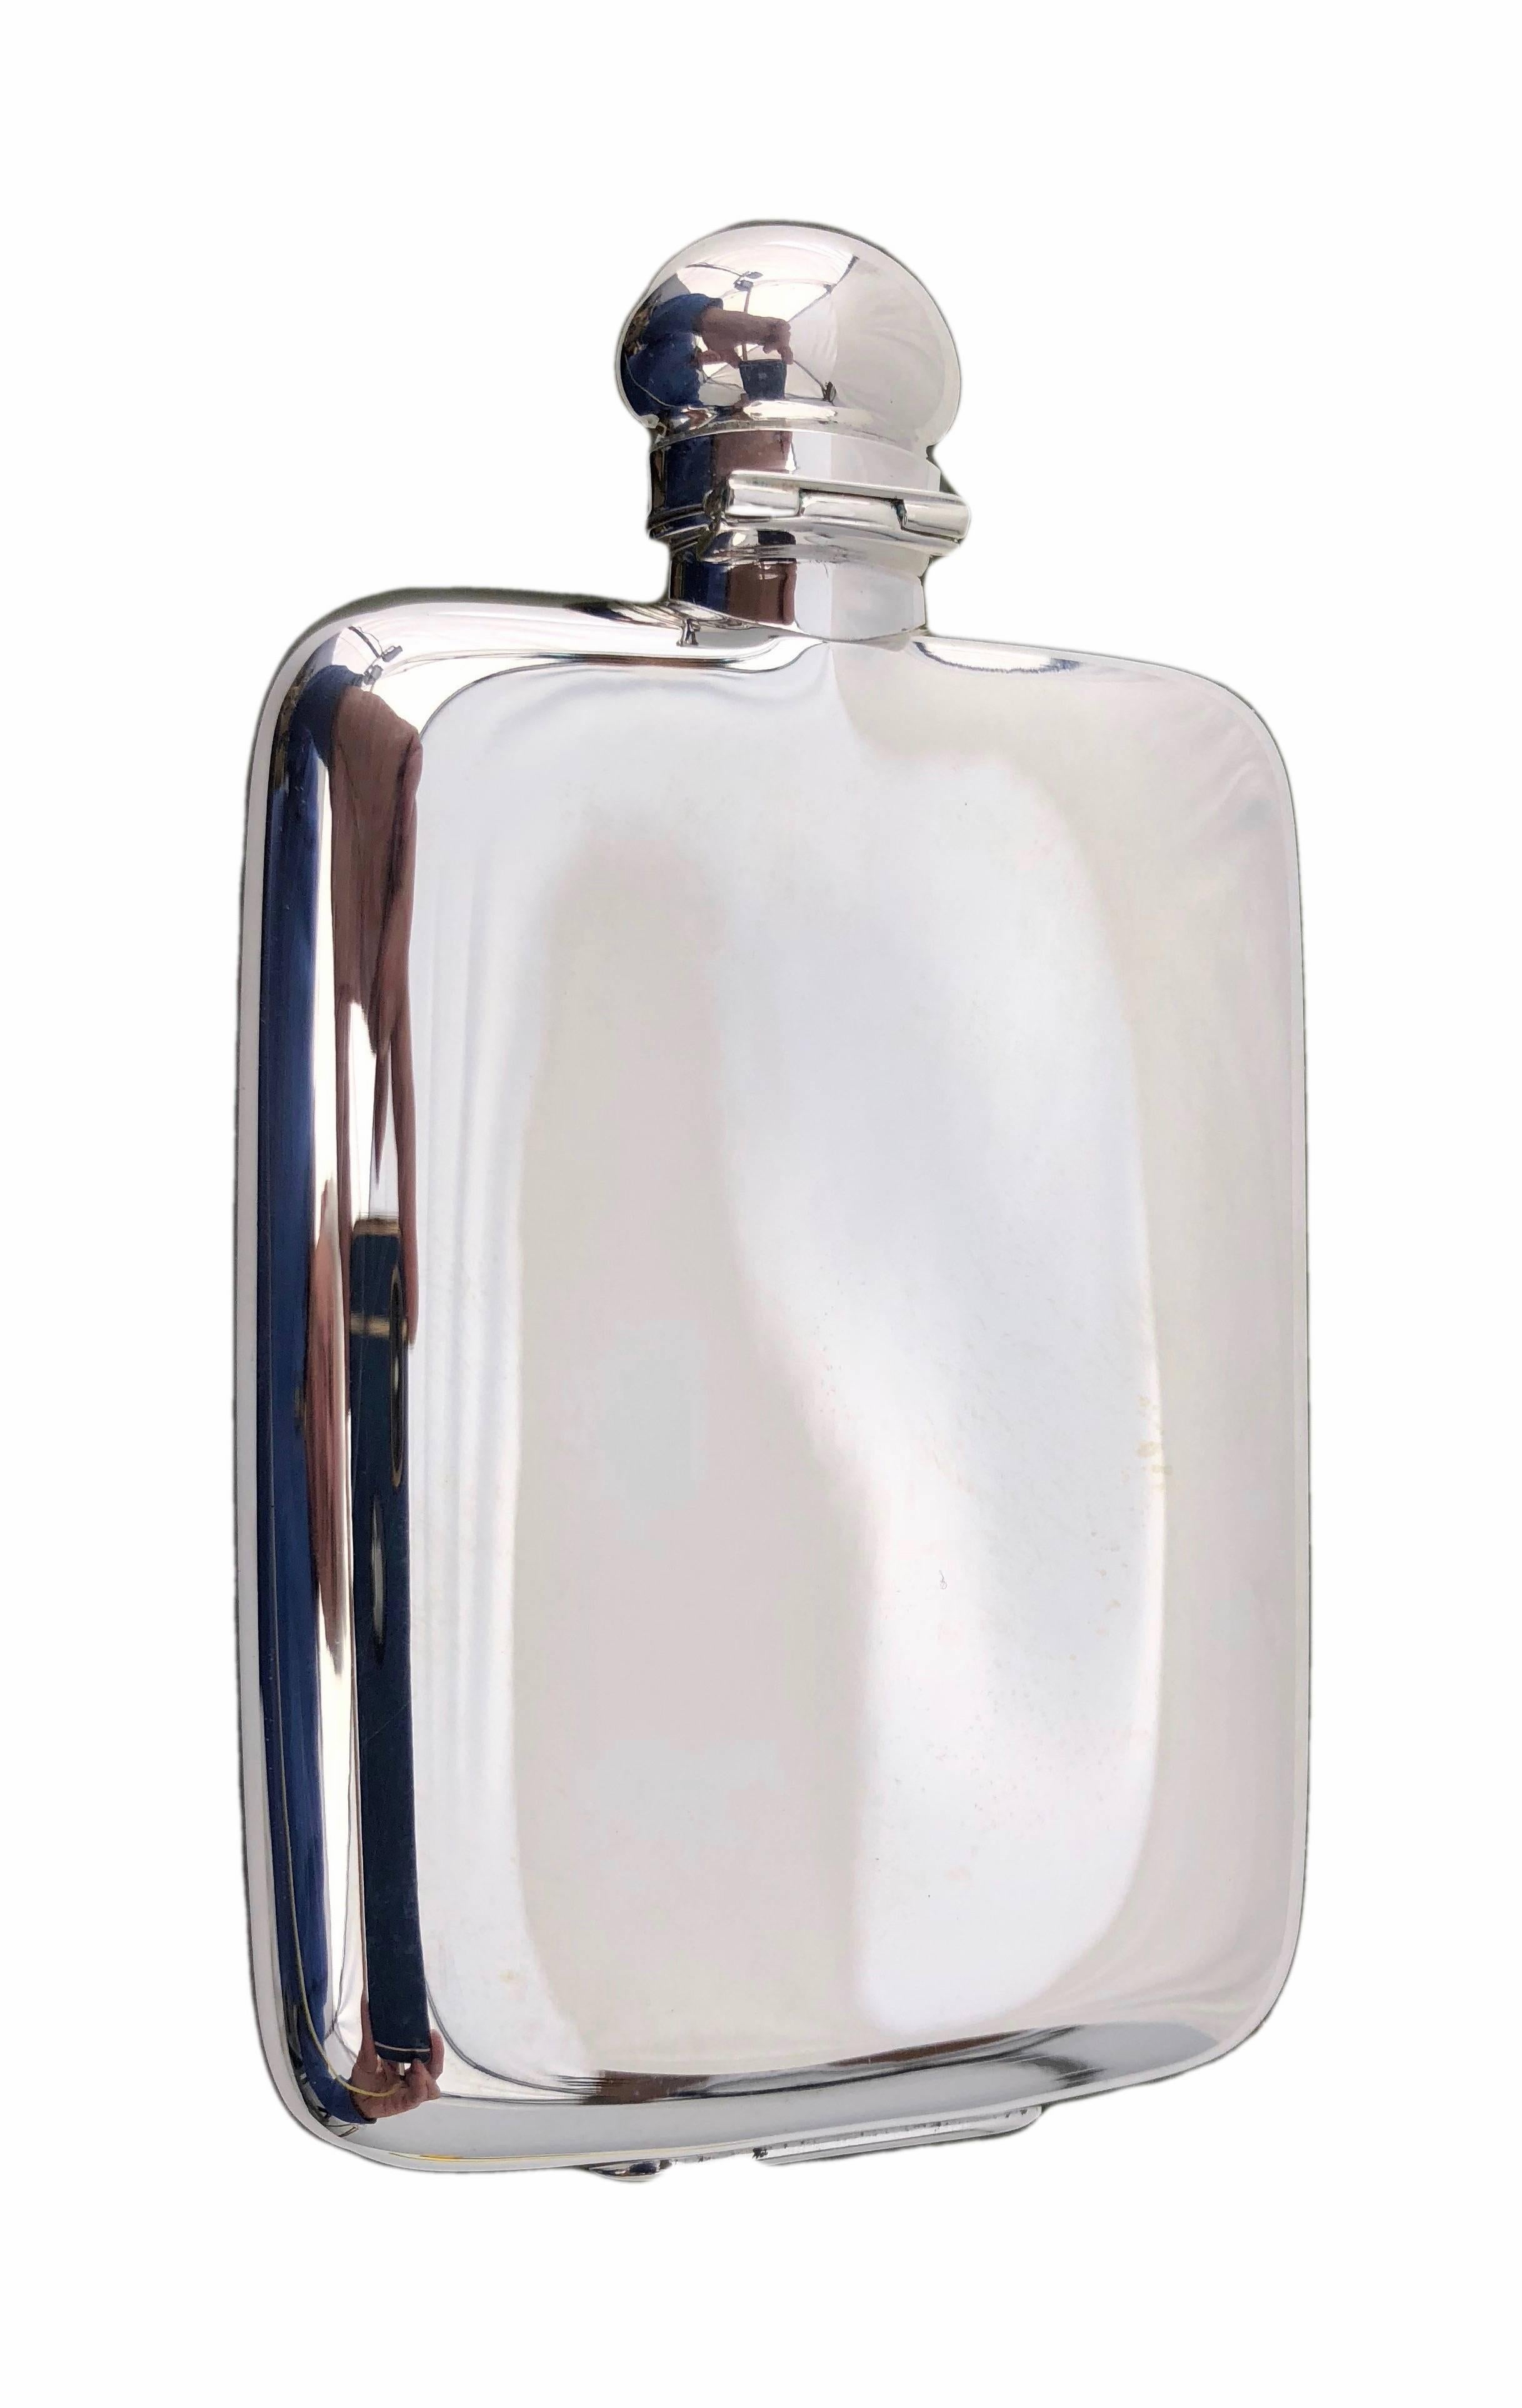 This beautiful Christofle plated silver whisky flask is the model Aria made in the late 1900s. It has a beautiful front band design and a silver plated hinged button top. It has never been used and comes in its original box with identifying label. A